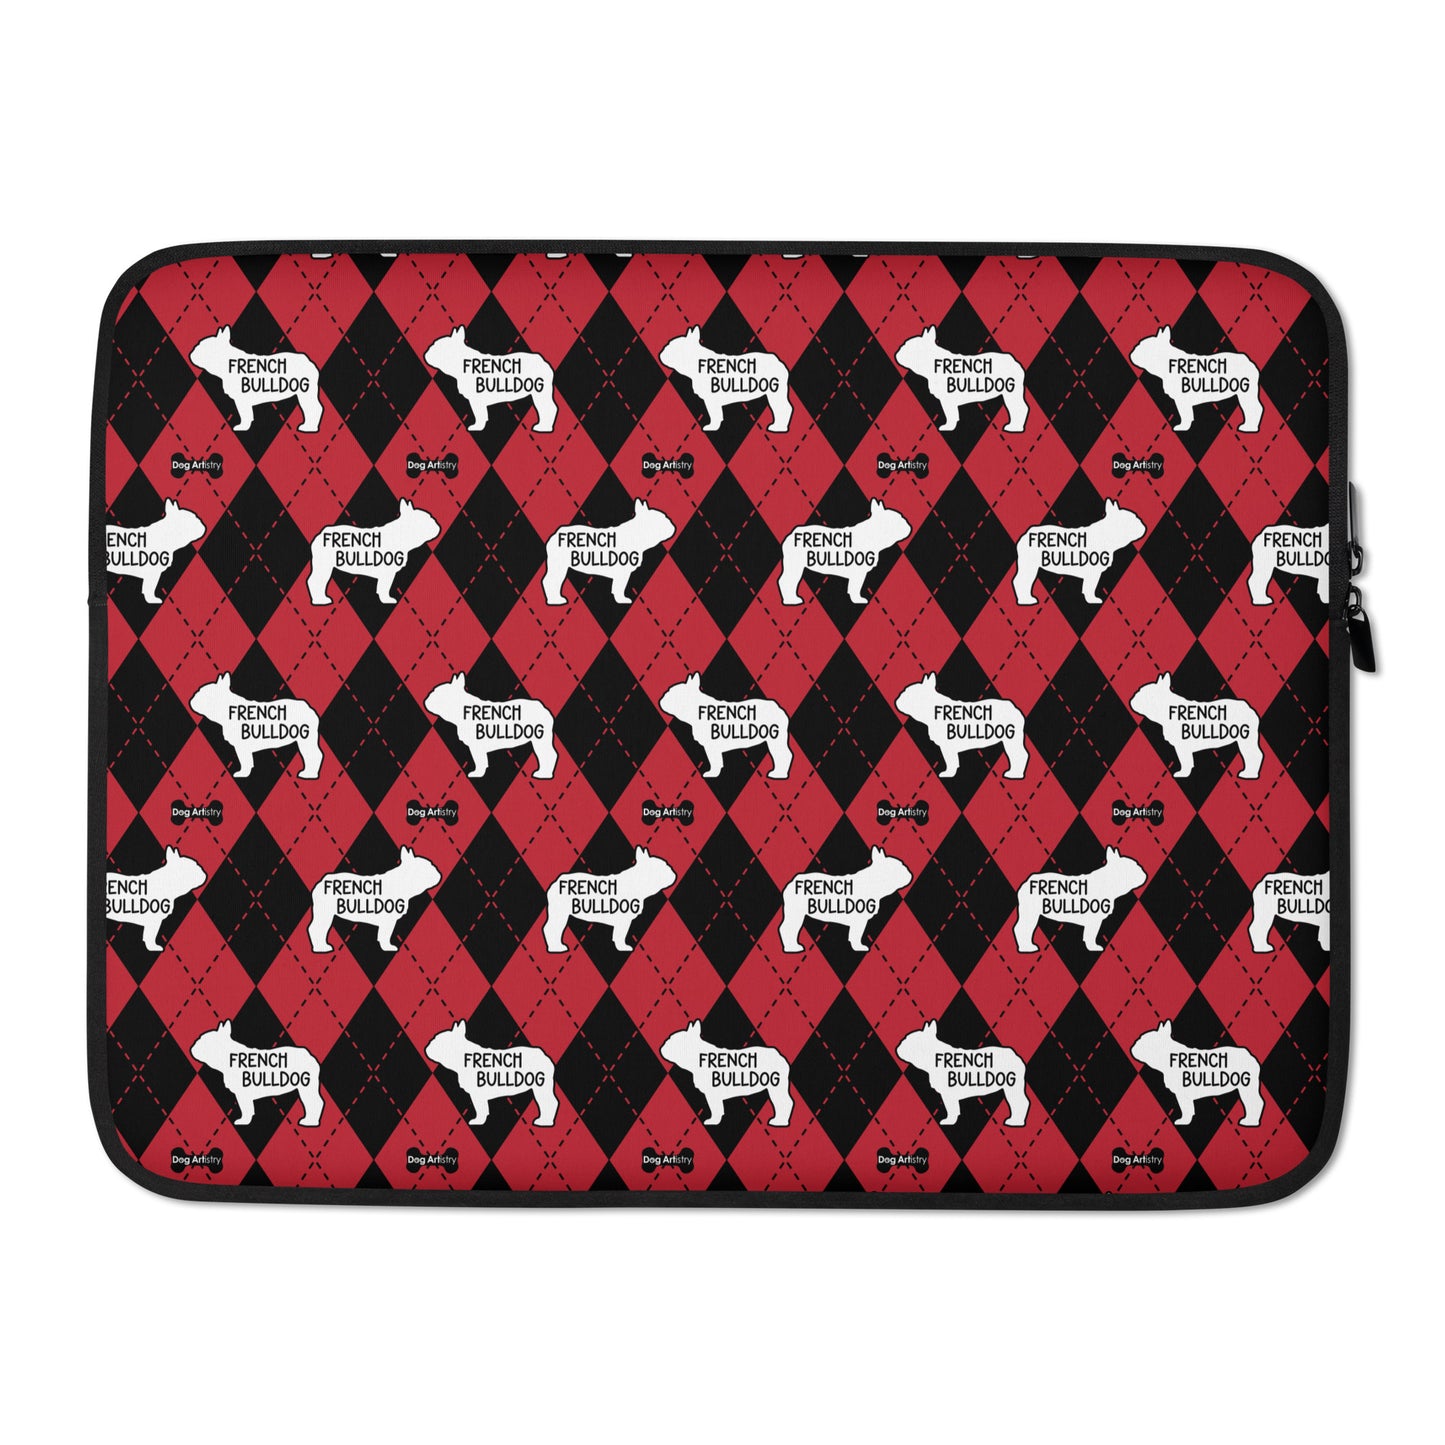 French Bulldog red and black argyle laptop sleeve by Dog Artistry